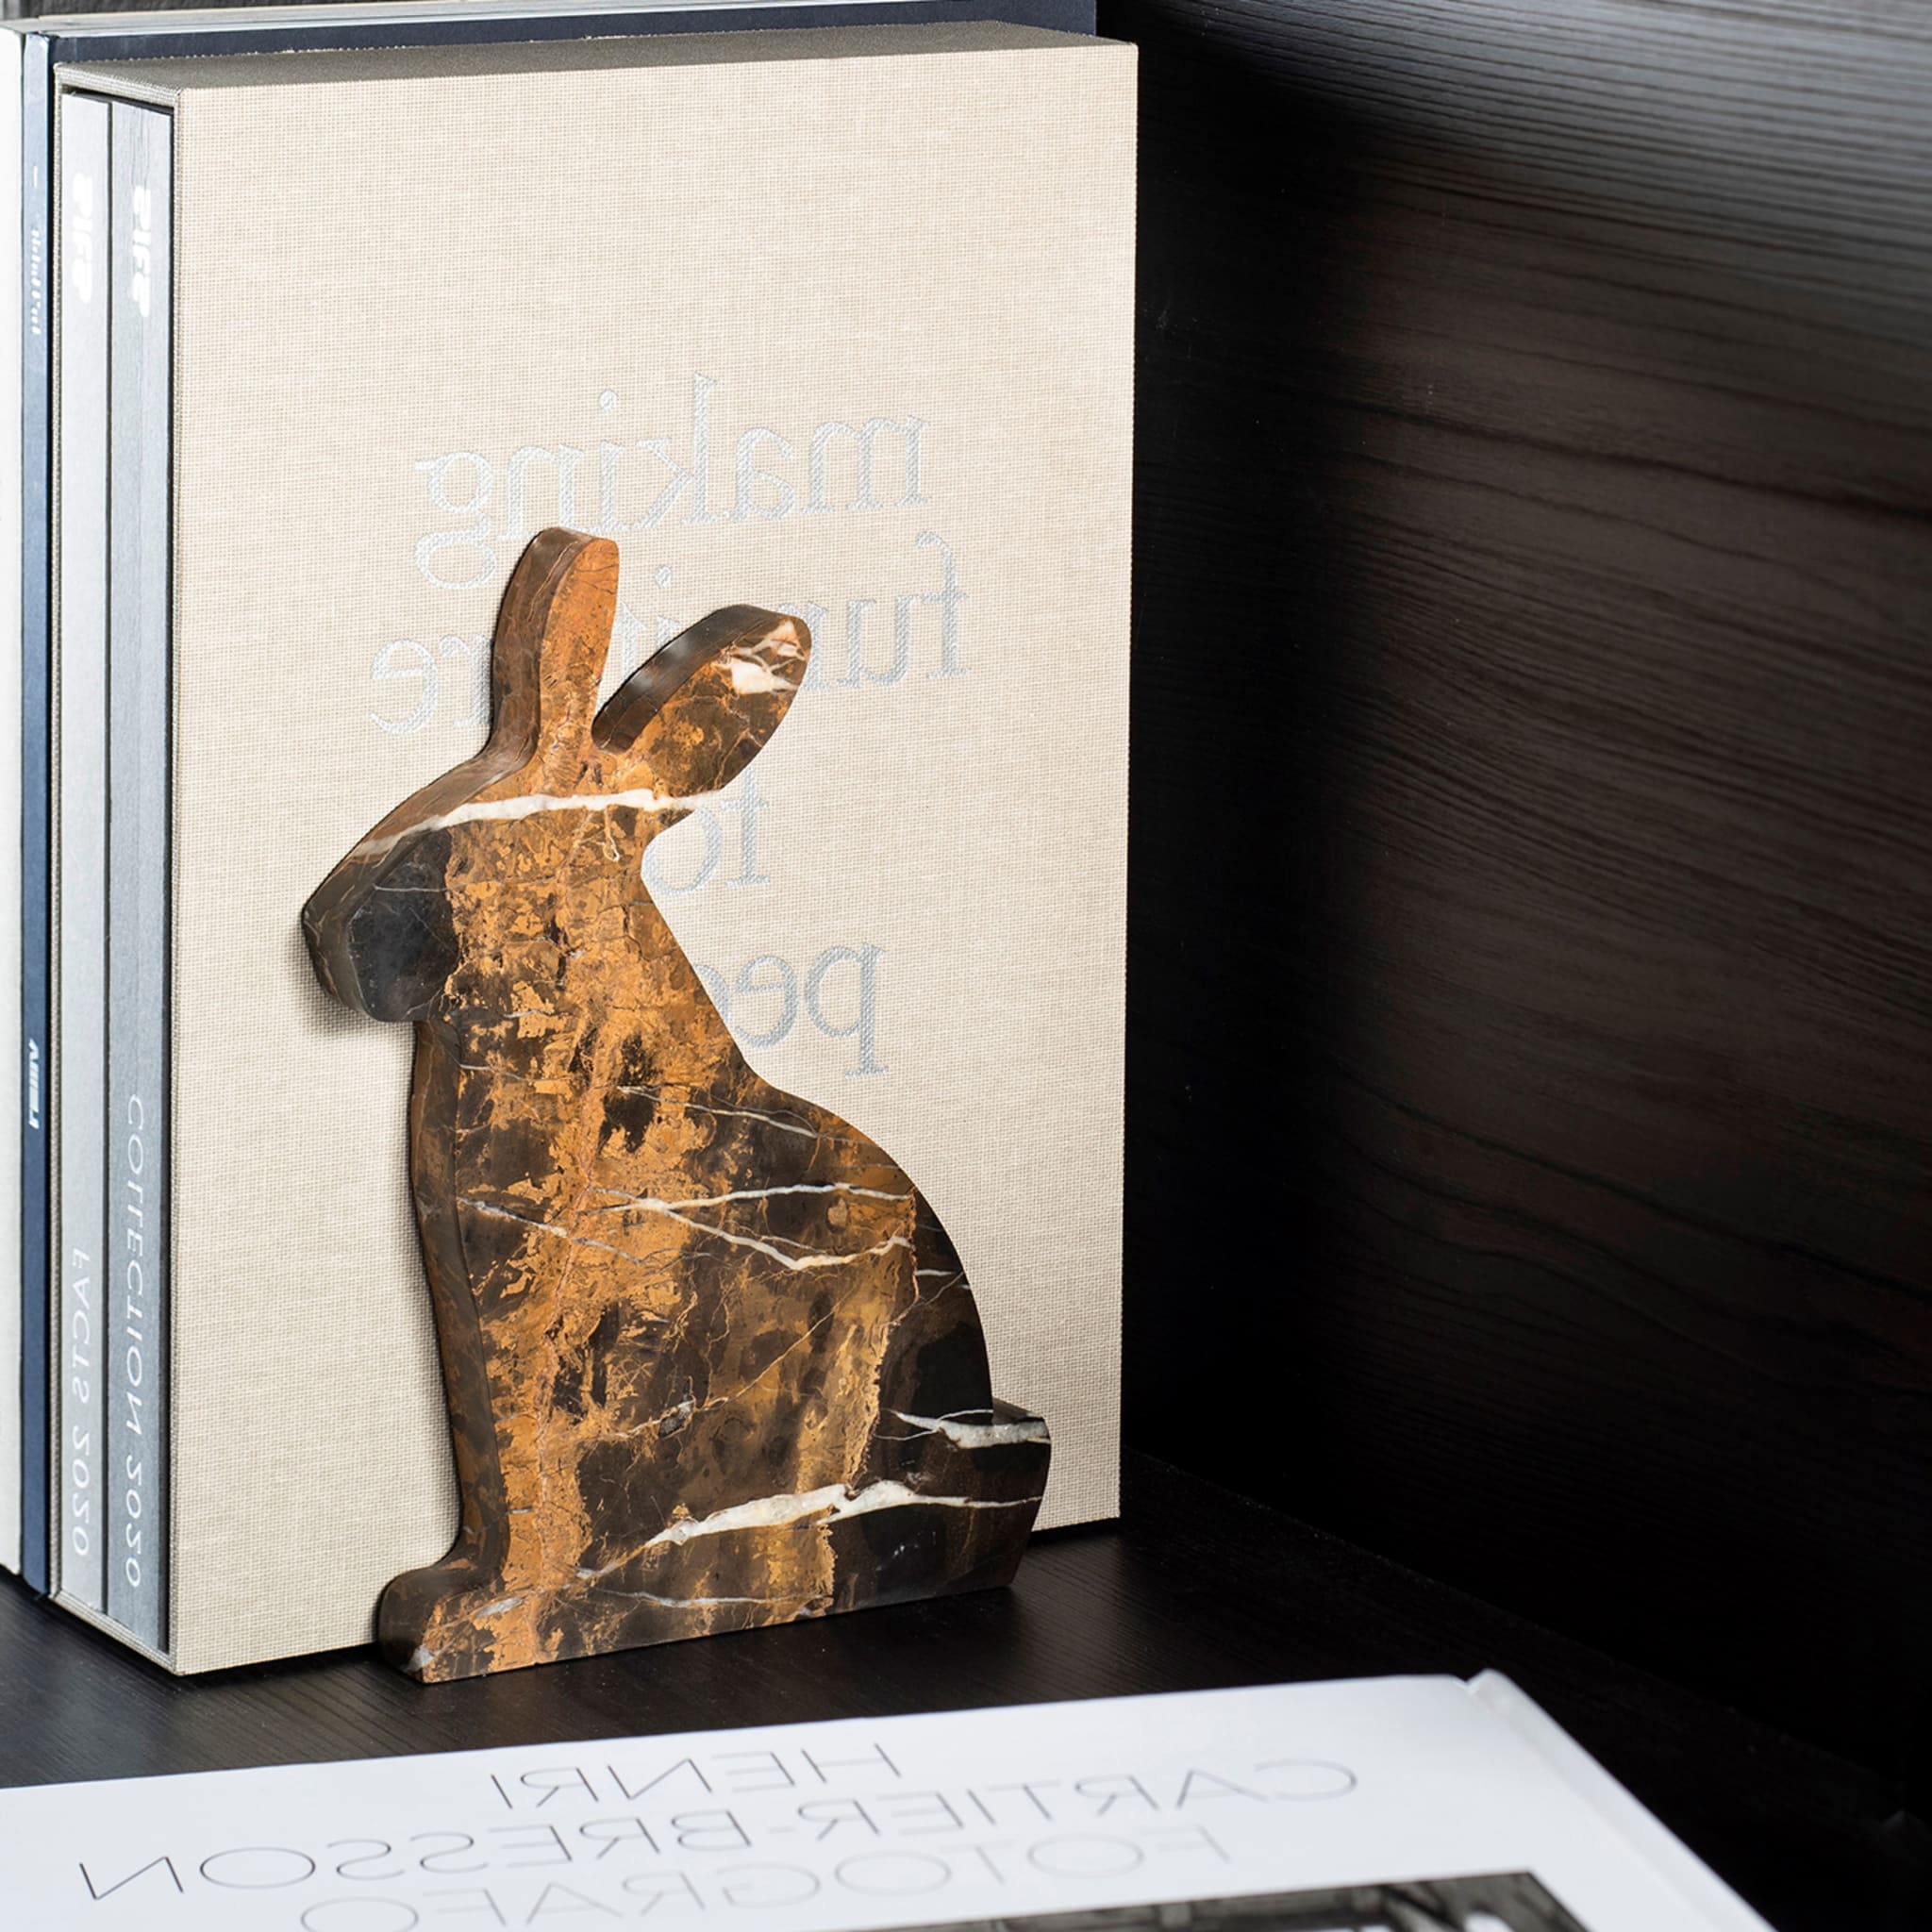 Bunny Set of 2 Black & Gold Bookends by Alessandra Grasso - Alternative view 5